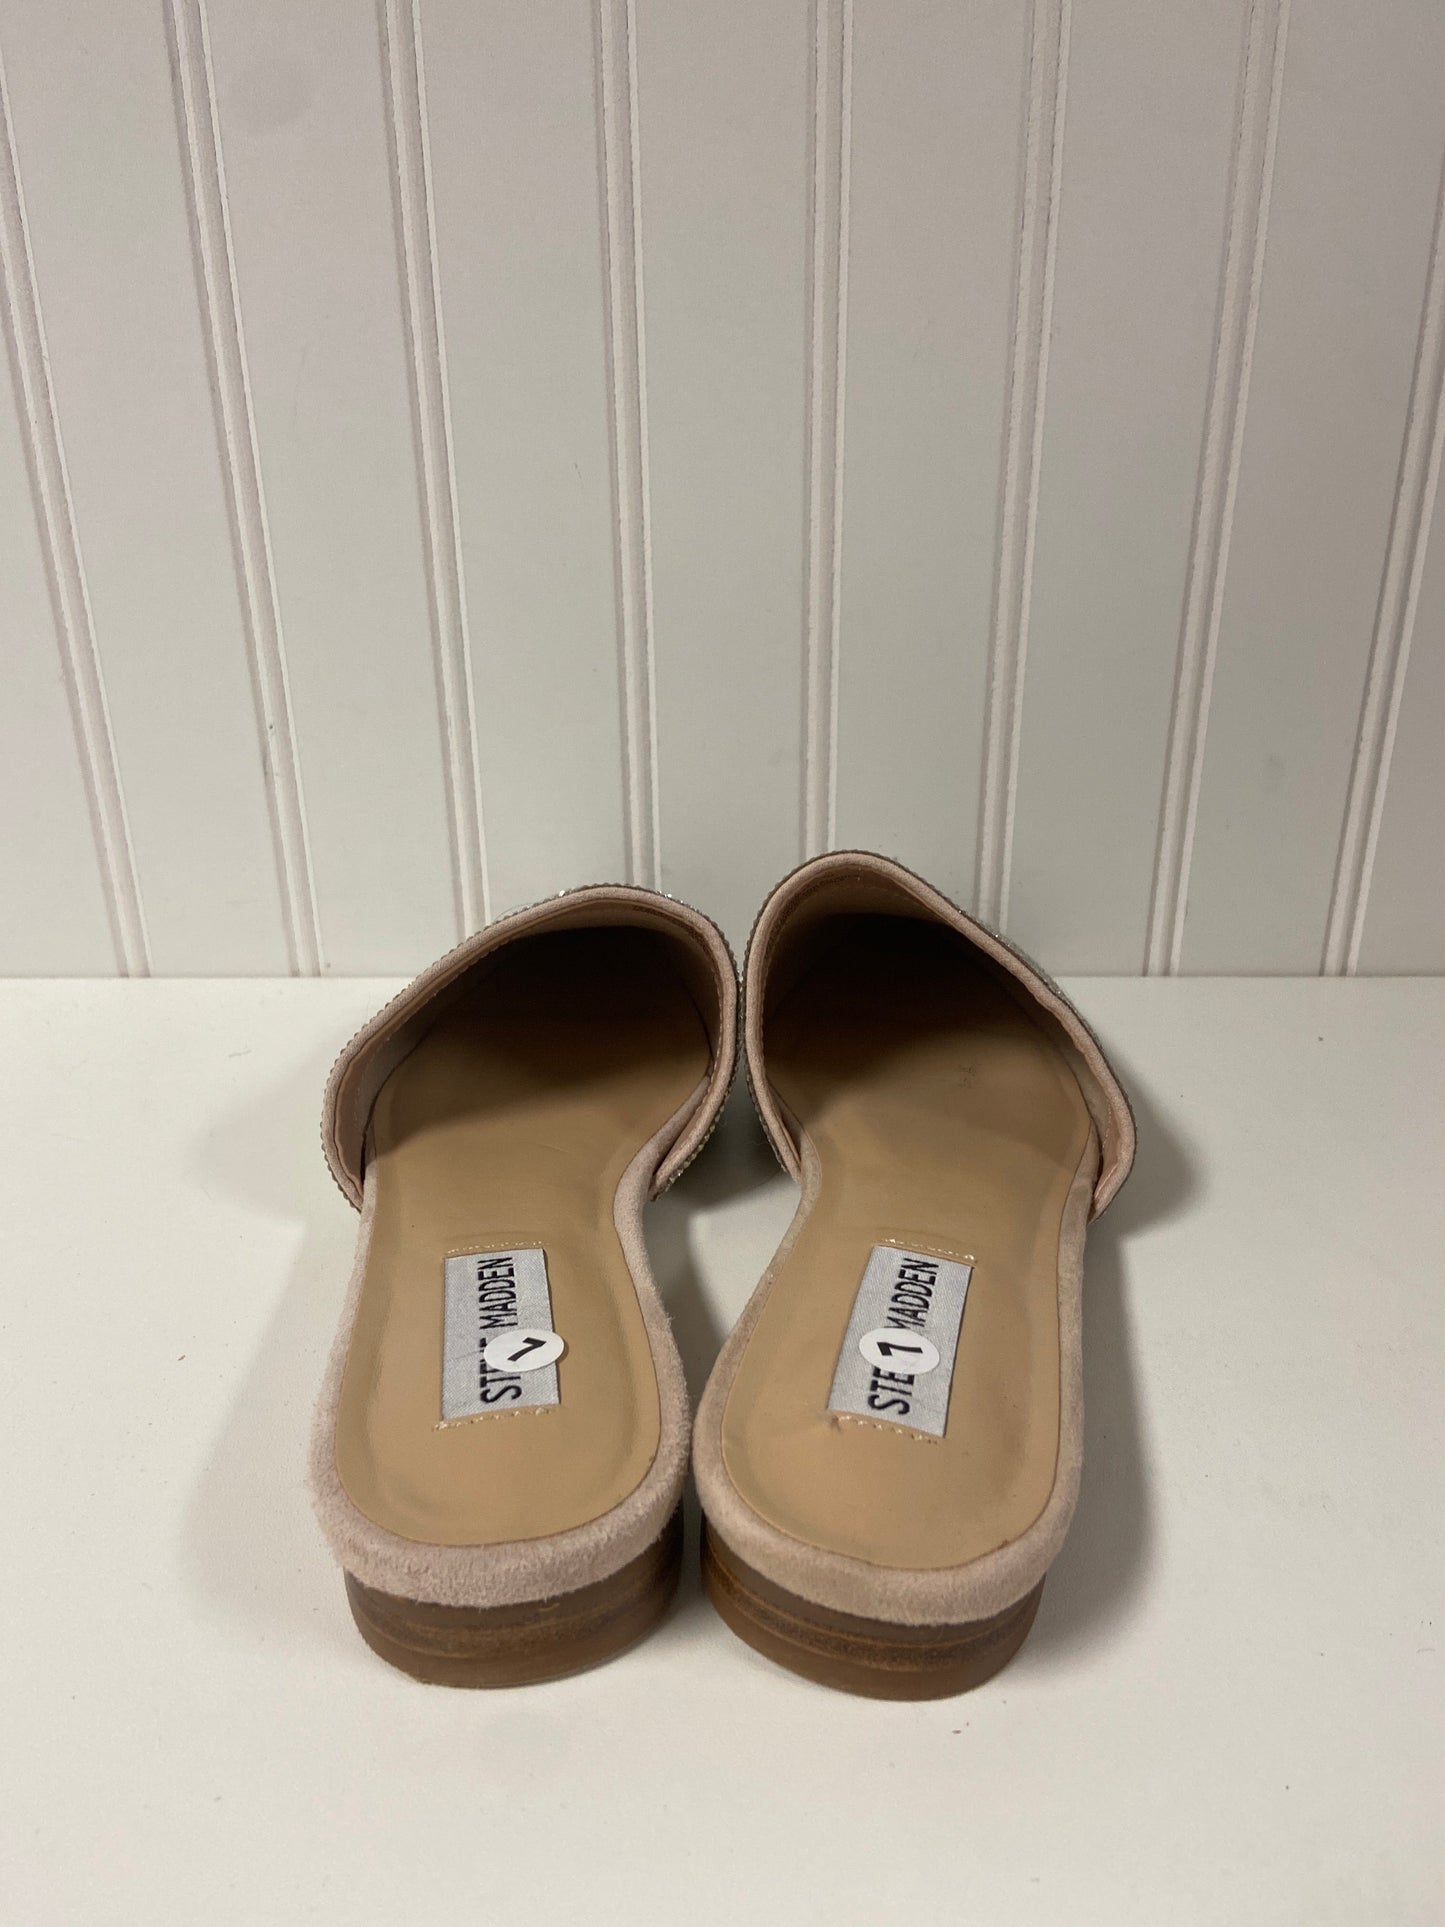 Silver & Tan Shoes Flats Steve Madden, Size 7